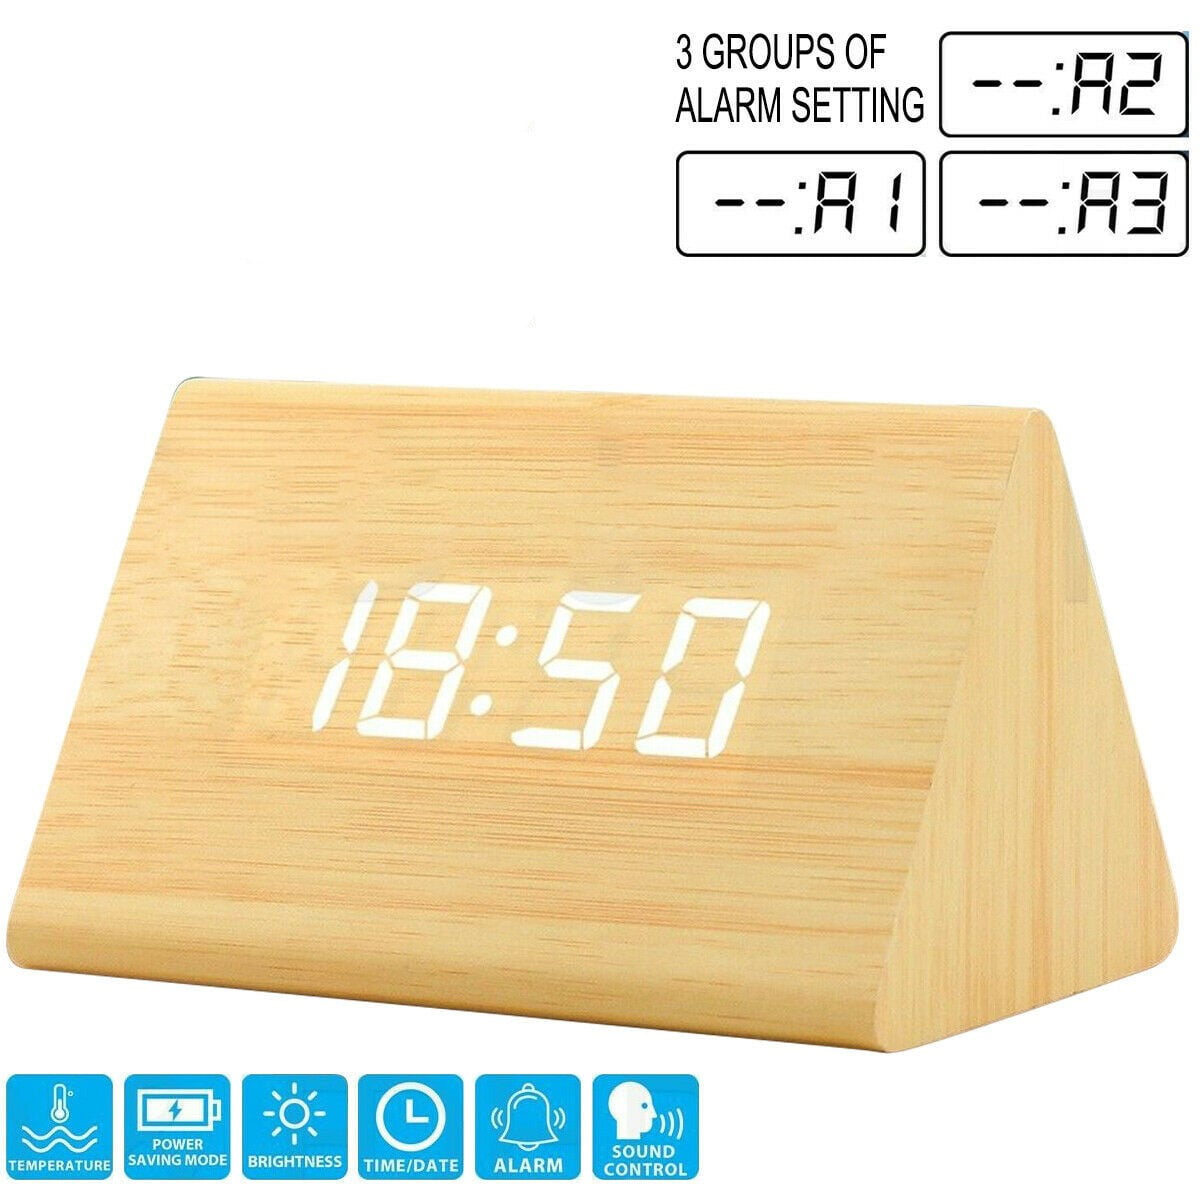 AC11Black/_White Multi-function LED Alarm Clock with Time//Date// Temperature Display and Voice Control for Home Office Travel Lanker Wooden Digital Clock